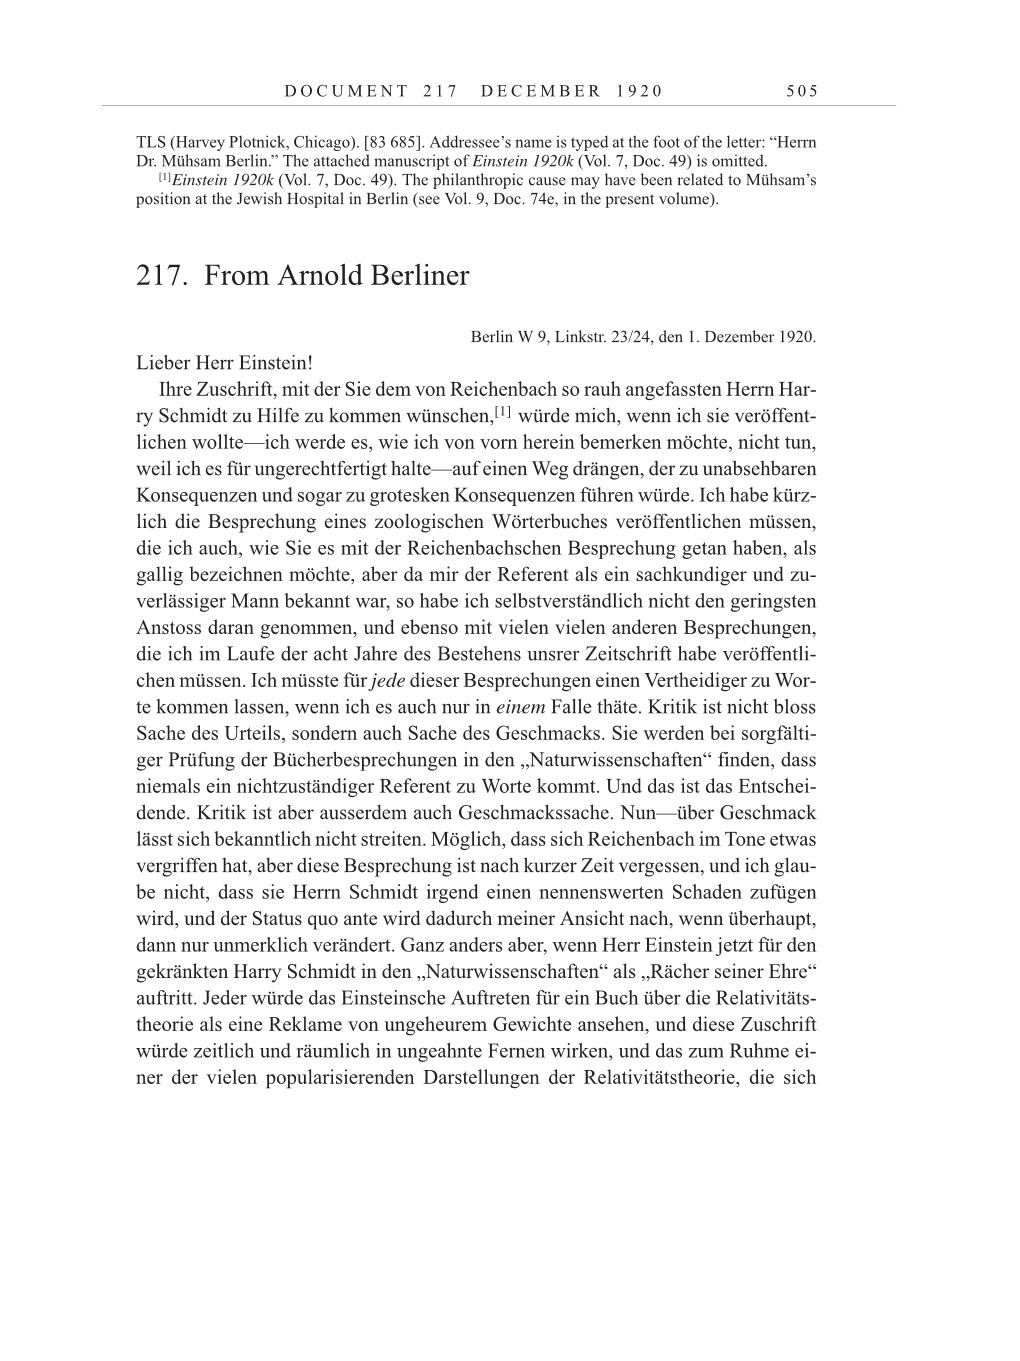 Volume 10: The Berlin Years: Correspondence May-December 1920 / Supplementary Correspondence 1909-1920 page 505